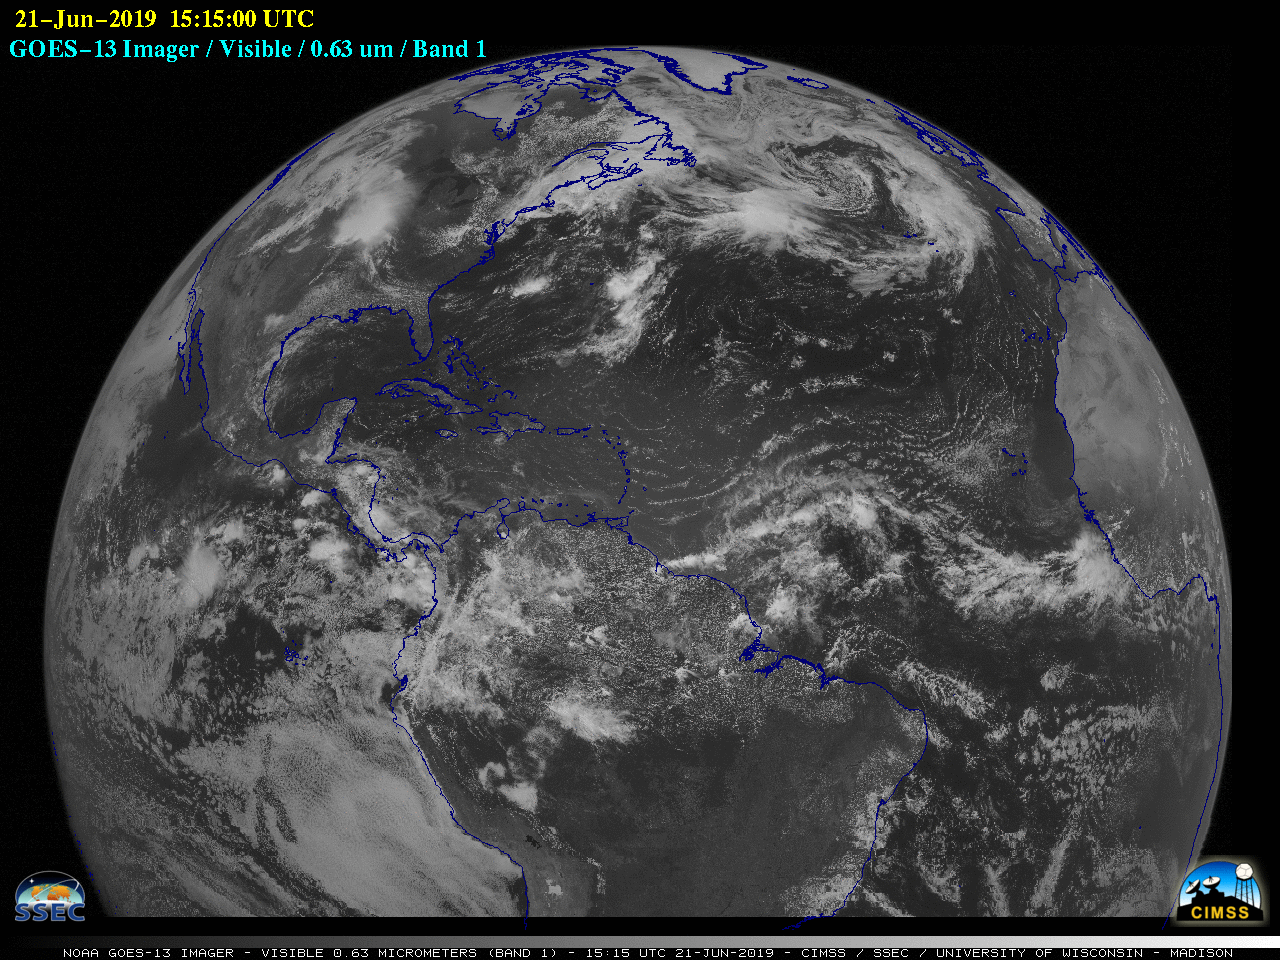 GOES-13 Visible (0.63 µm) images [click to play animation | MP4]